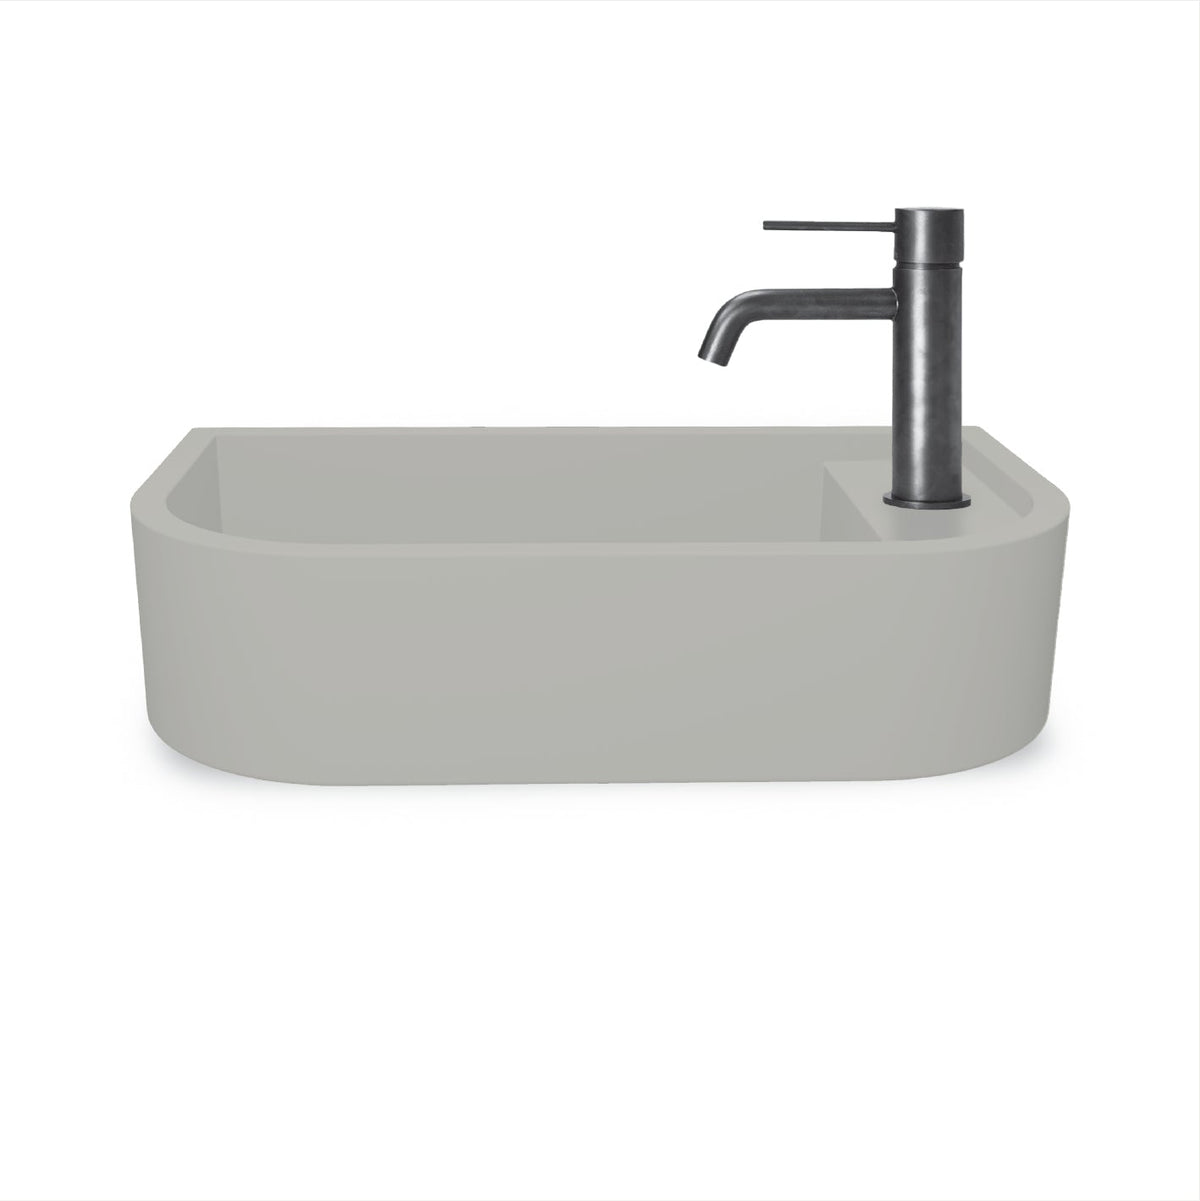 Loop 02 Basin - Overflow - Wall Hung (Ivory,Tap Hole,Chrome)